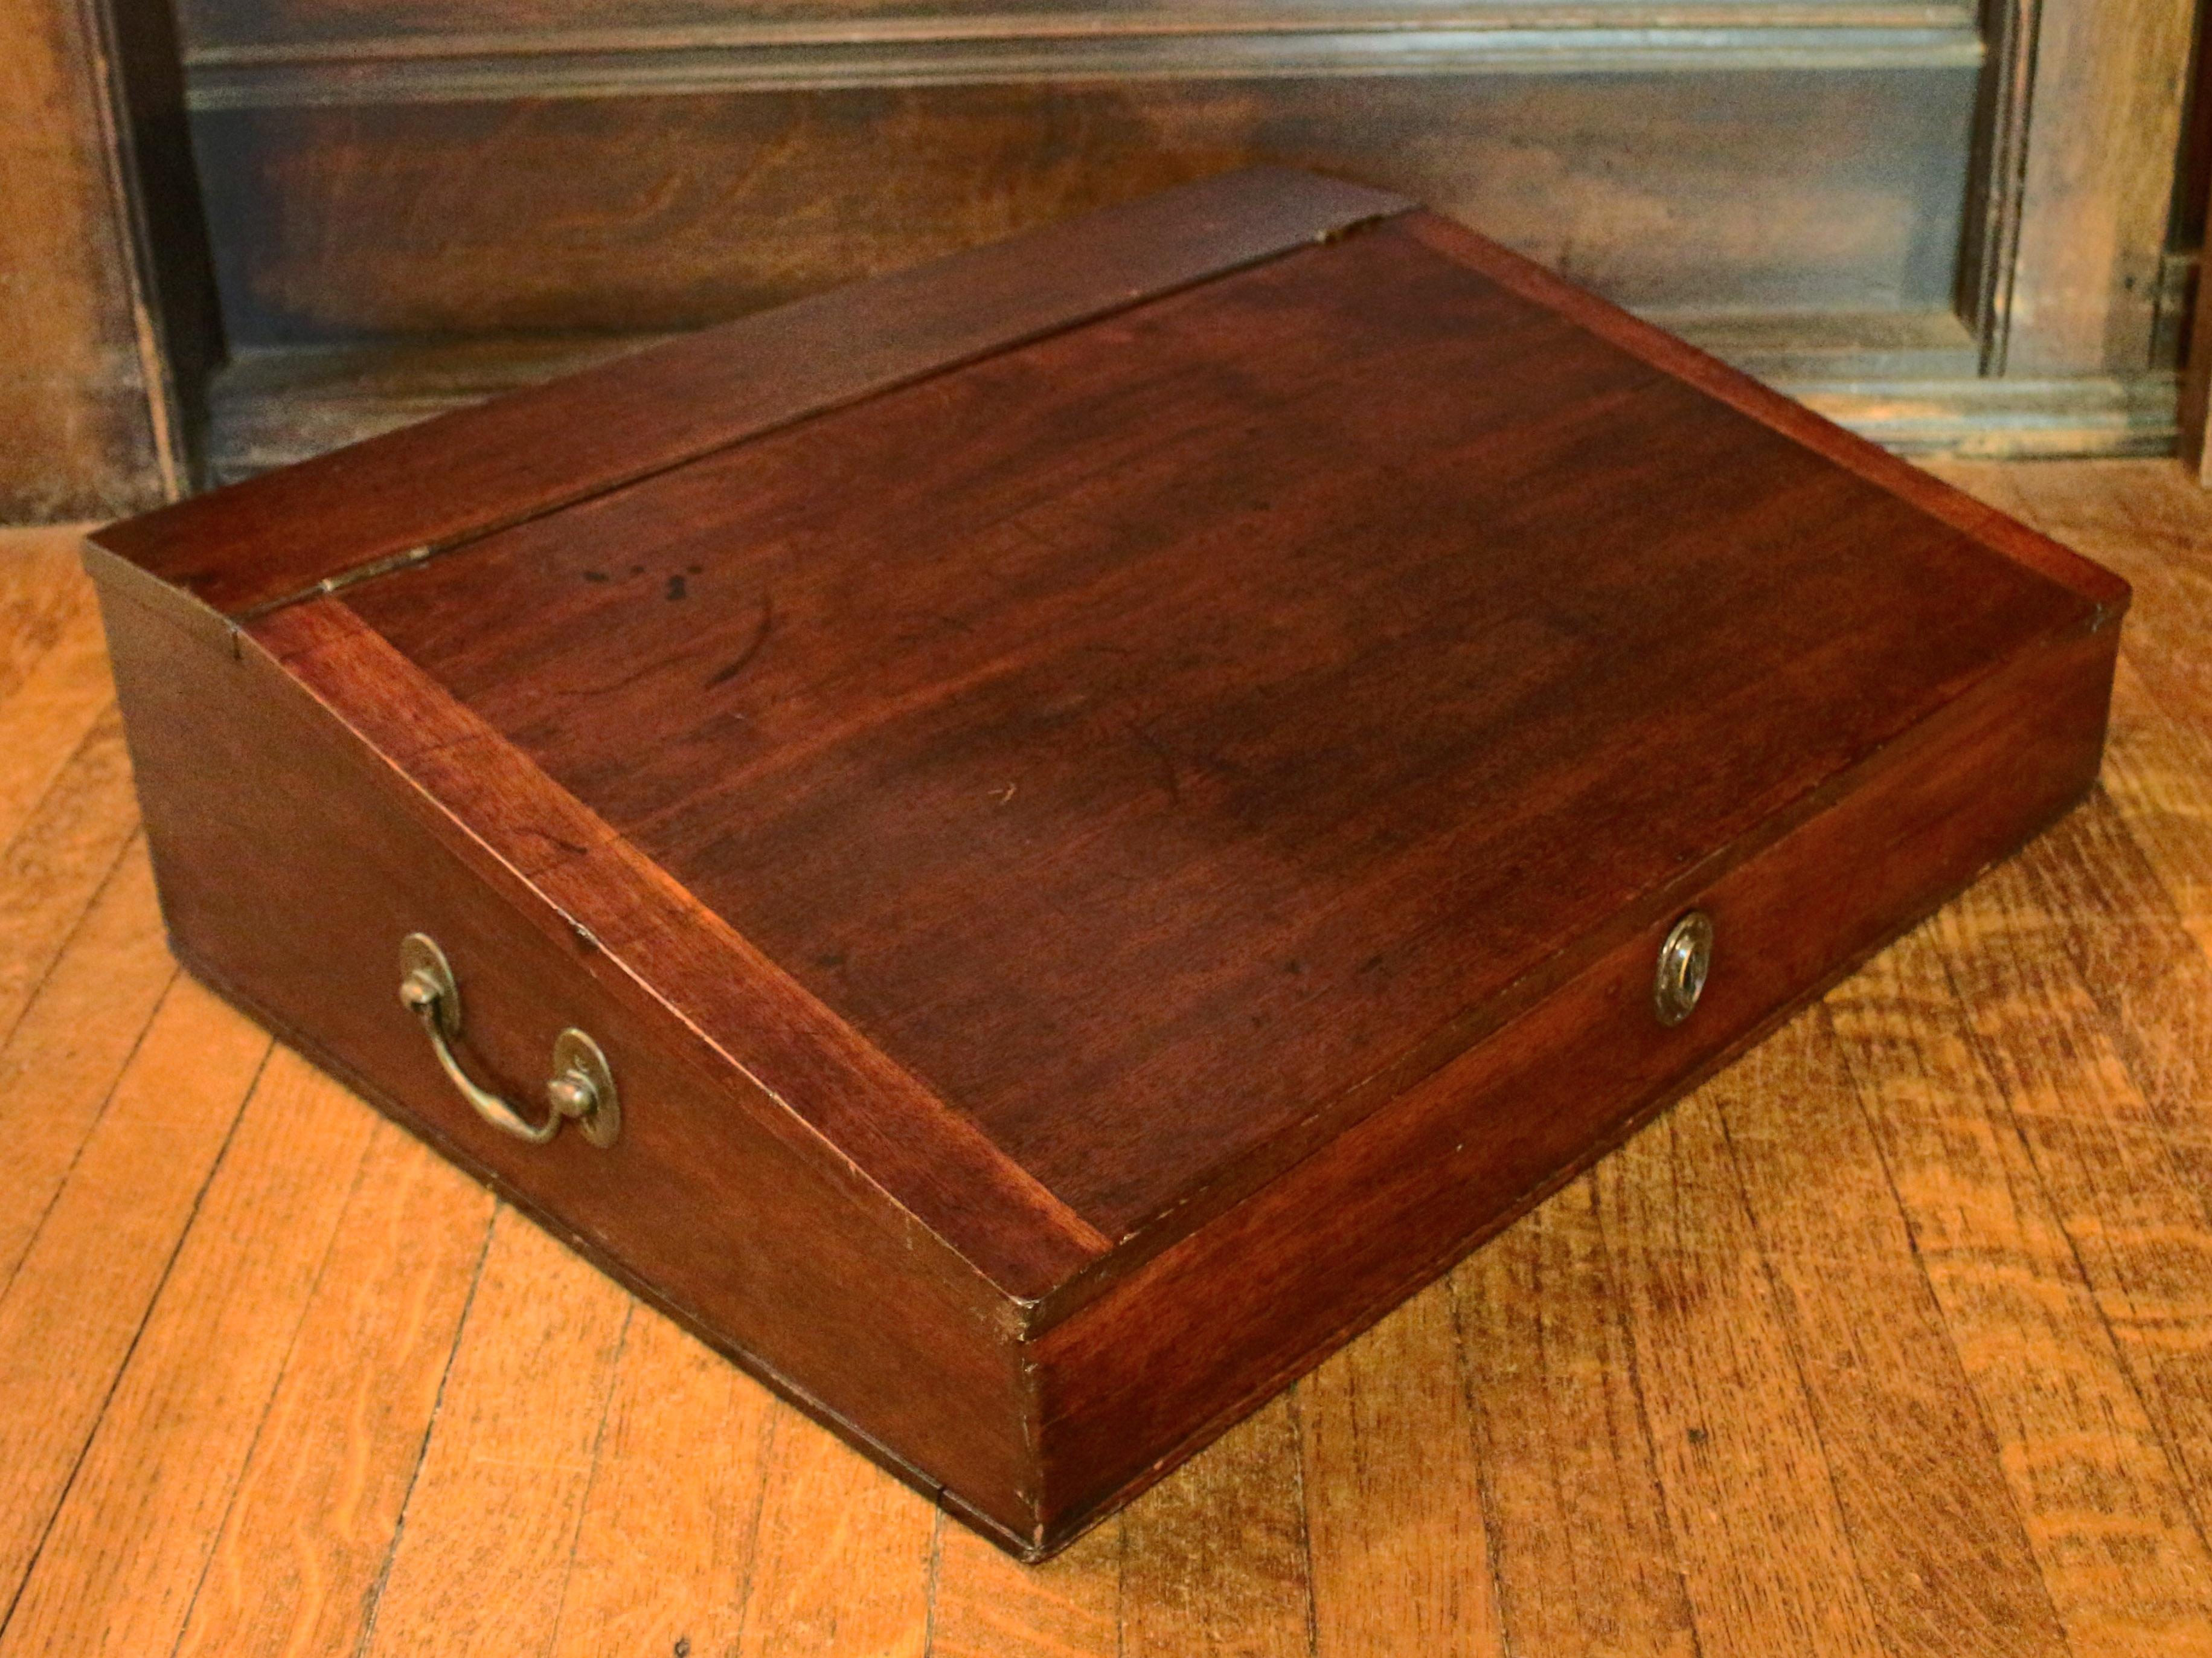 Georgian writing slope box, c.1780, of mahogany. English. Well fitted interior with pigeon holes, drawers, and two shaped supports for the slope. Apparently original hardware. 25